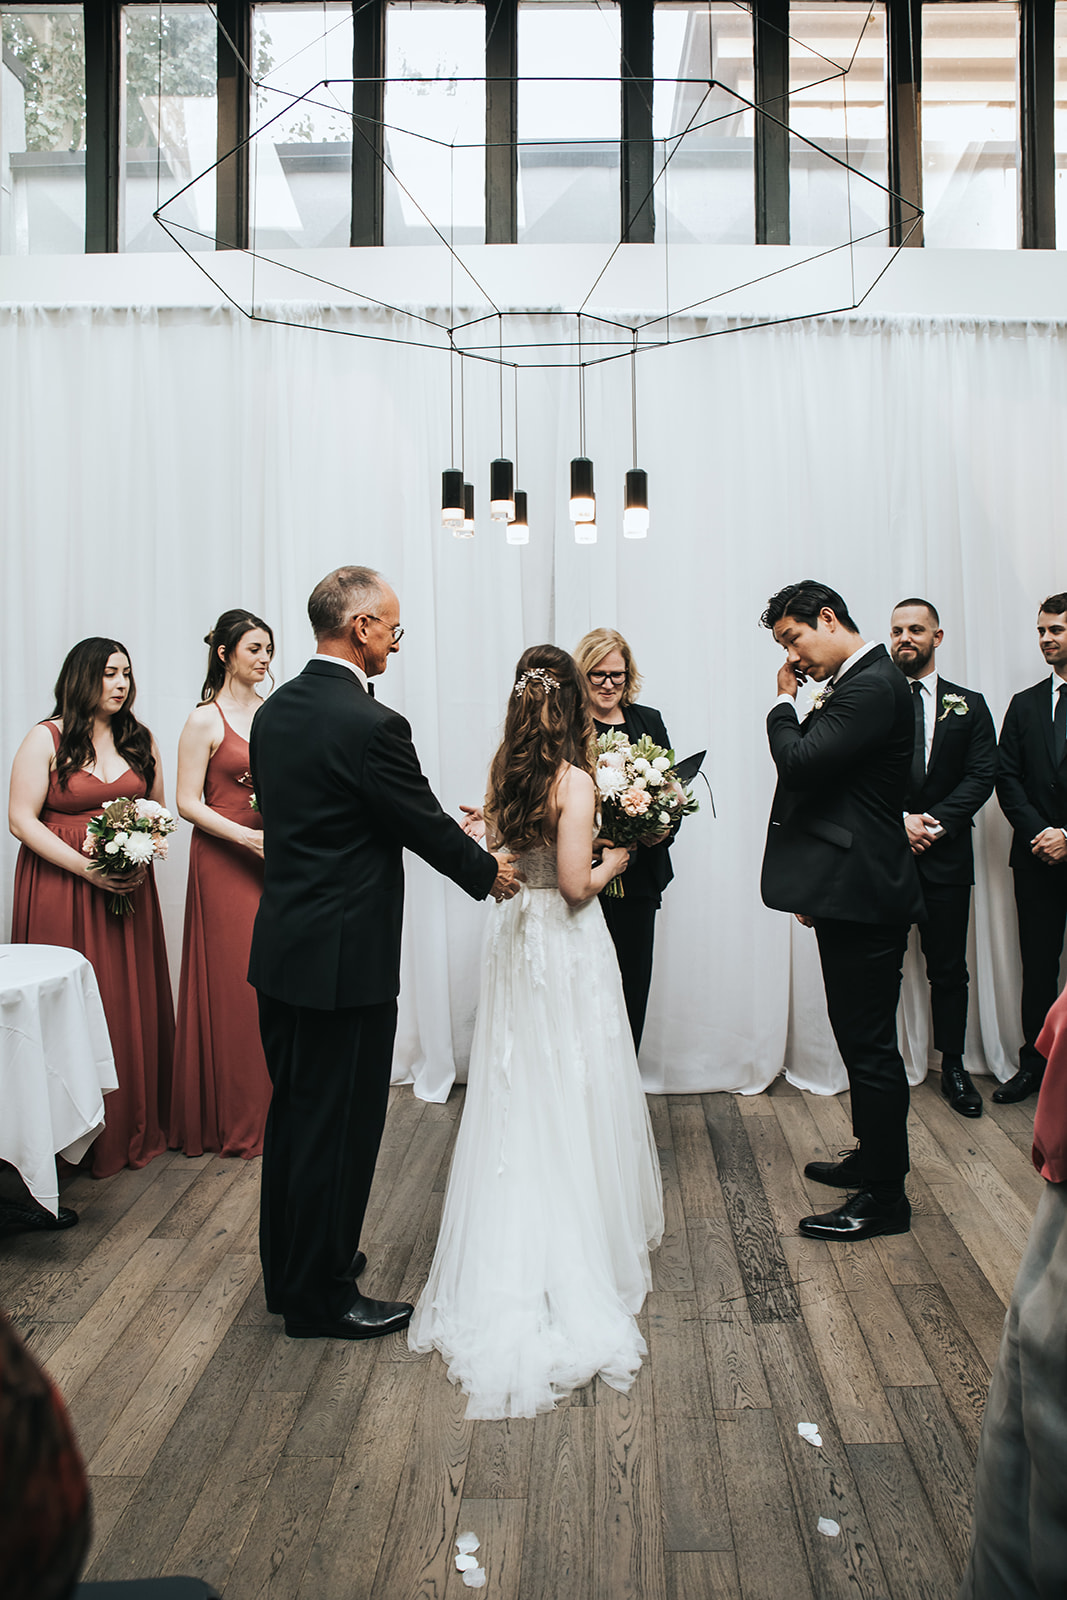 Timeless Sophistication: Eric and Lisa's September Alforno Bakery & Cafe Wedding